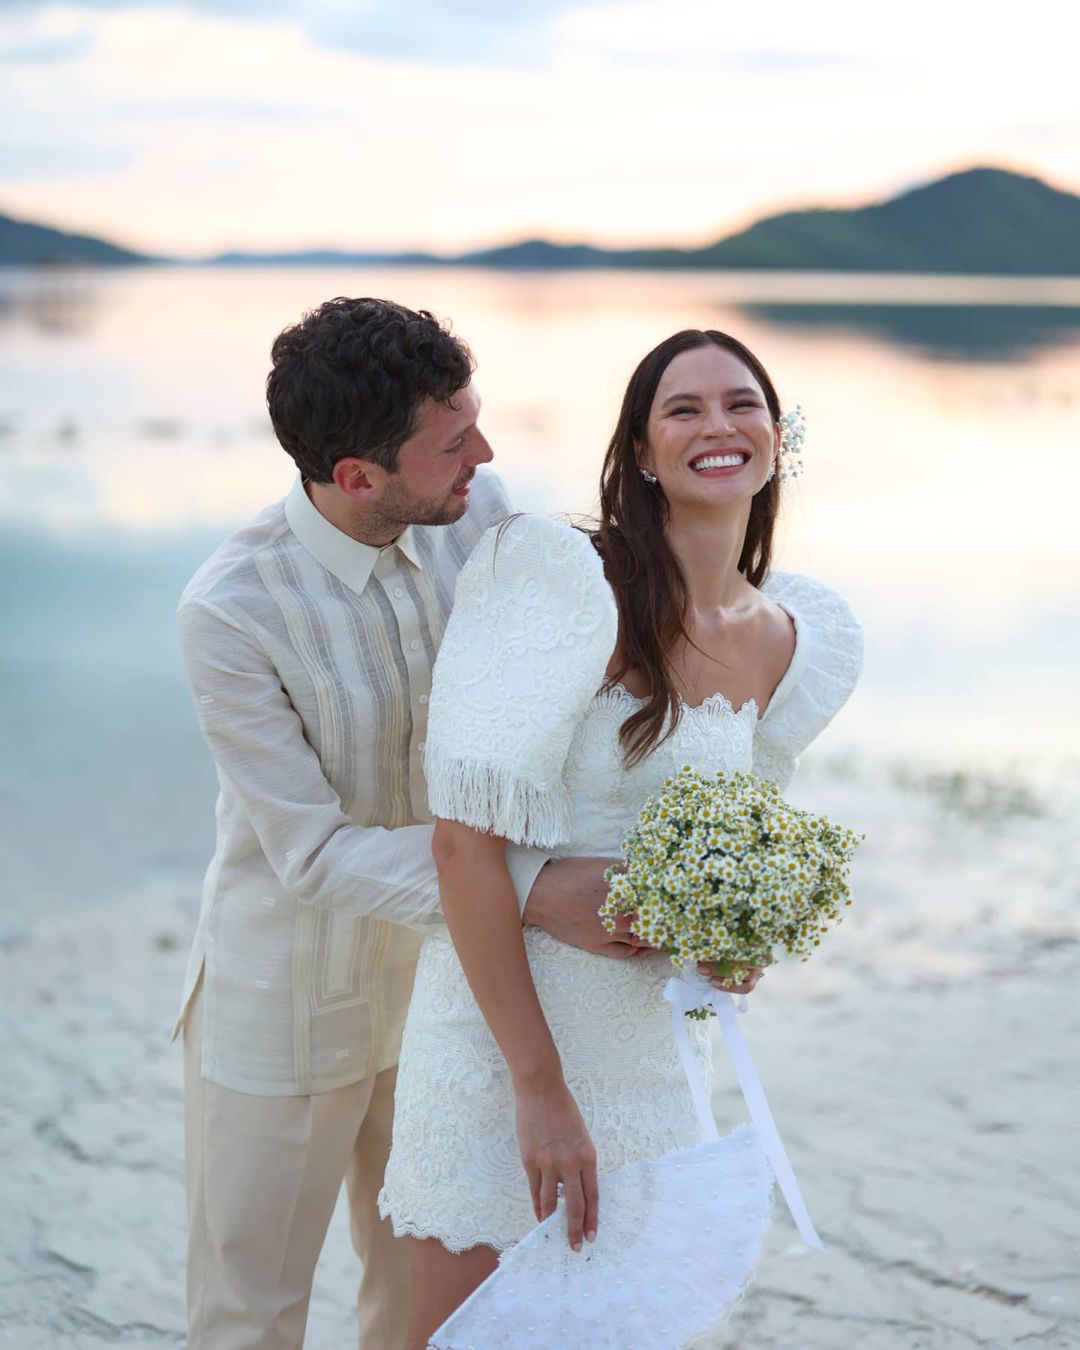 All the Highlights of Jess Wilson's Wedding in Palawan | Preview.ph